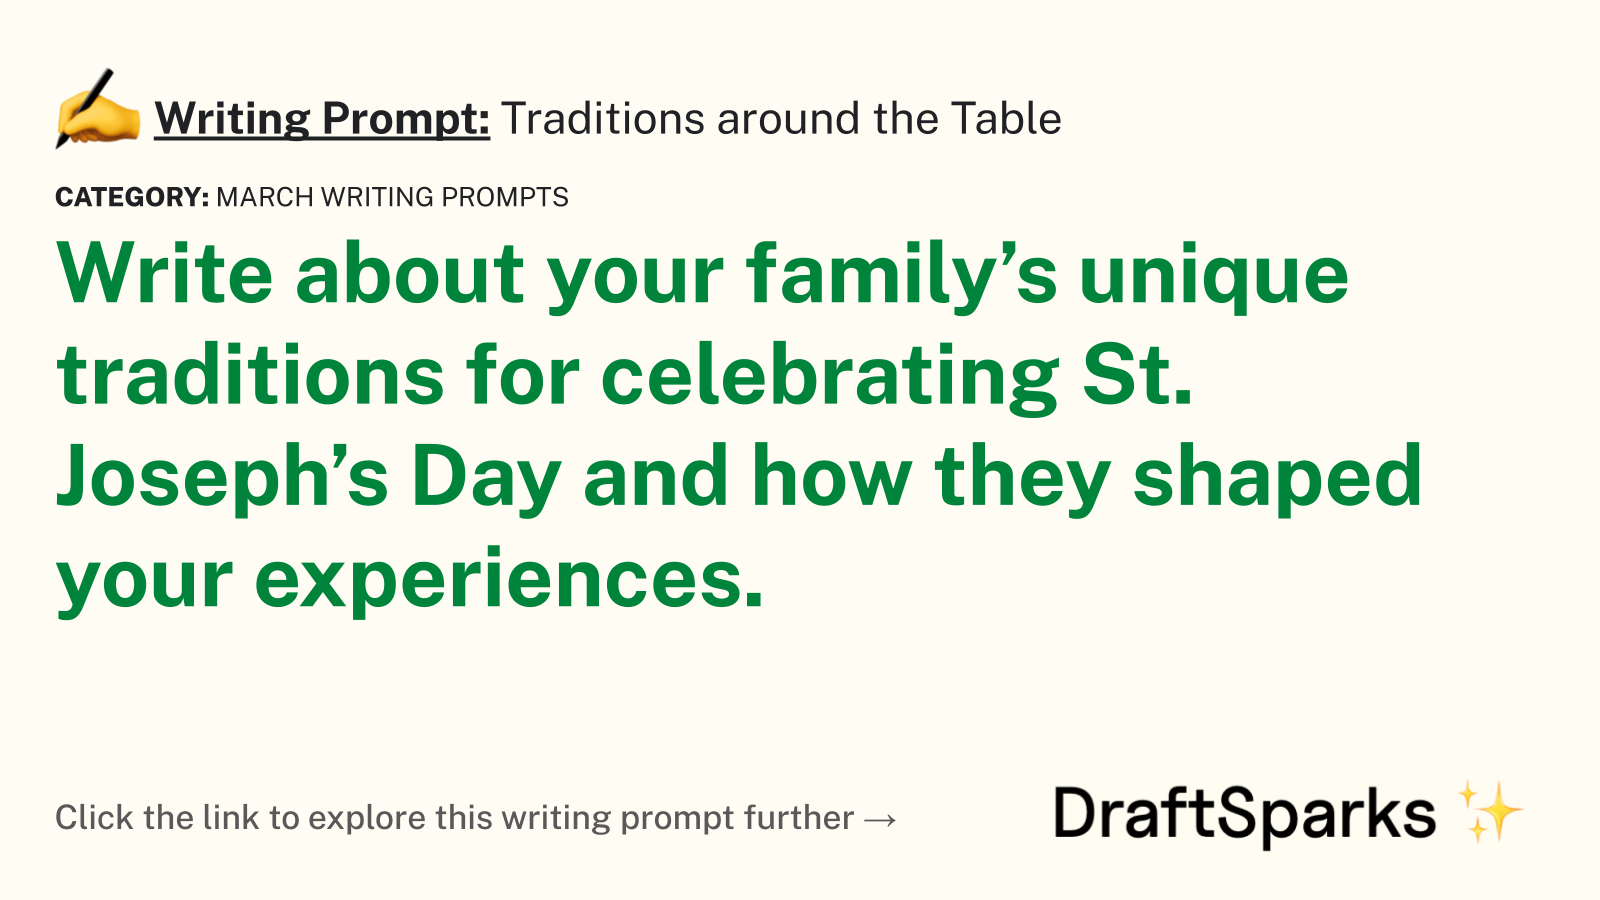 Traditions around the Table